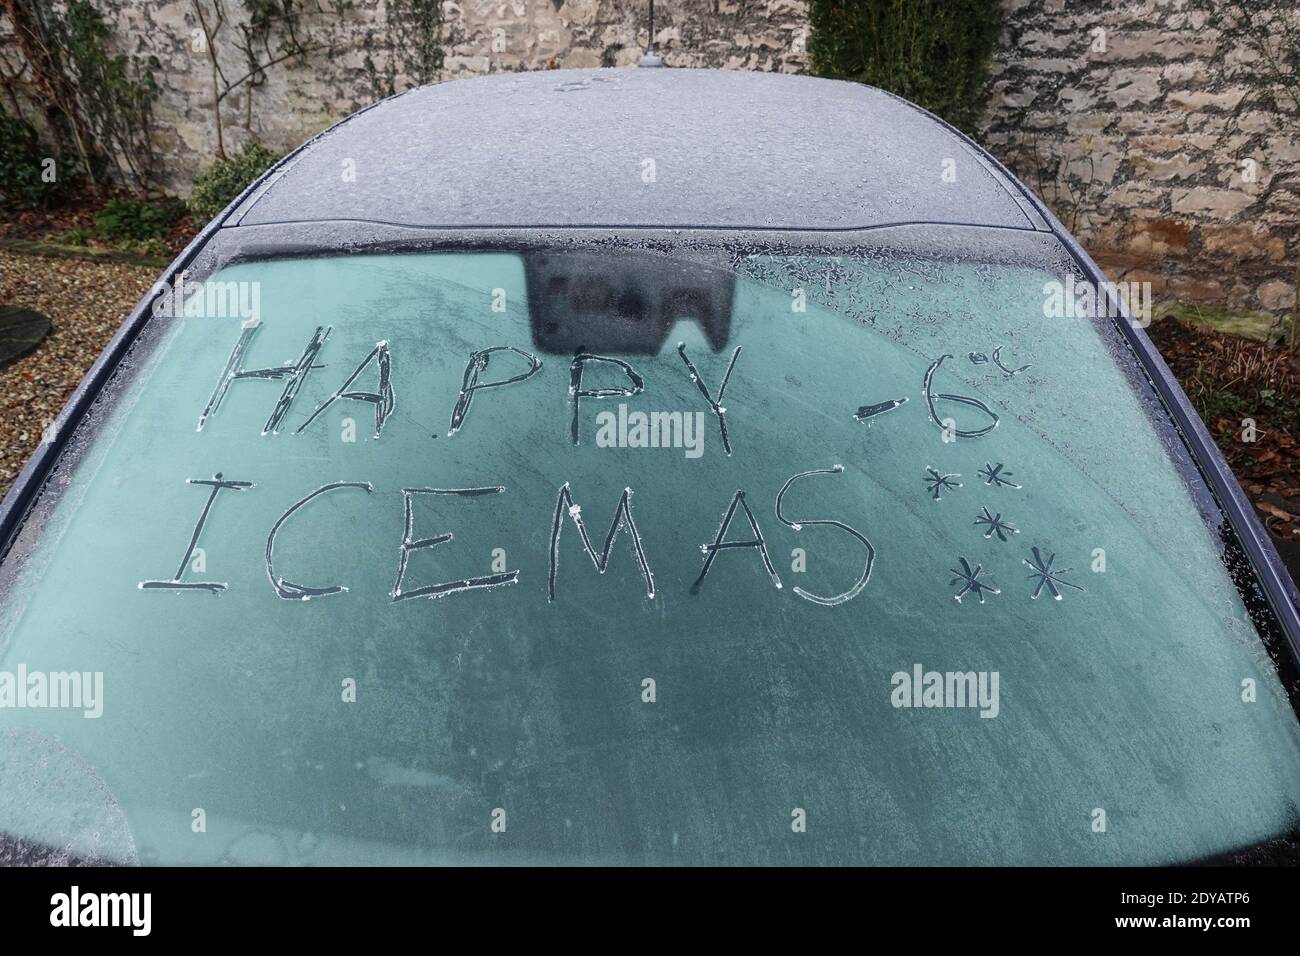 Garstang, Lancashire, December 25th 2020. A windscreen that has had the words 'Happy Icemas -6 degrees' etched into ice as subzero temperatures hit Northern England on Christmas Day in 2020. Temperatures of minus 6 froze Garstang in Lancashire to the core. A frosty covering blanketed cars and windscreens. Credit: Sam Holiday/Alamy Live News Stock Photo